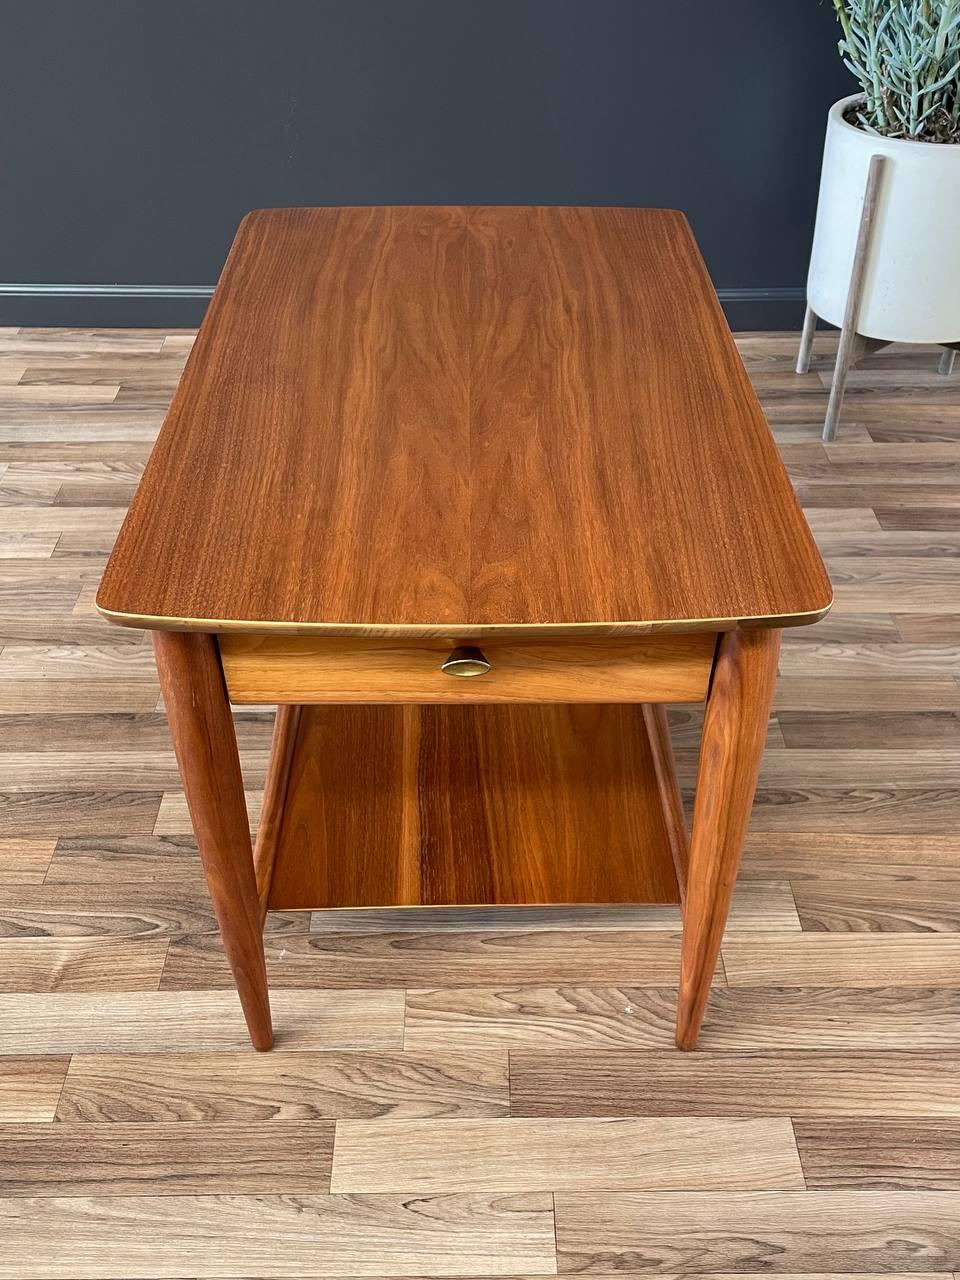 Newly Refinished - Mid-Century Modern Walnut Two-Tier Side Table by Mersman In Excellent Condition For Sale In Los Angeles, CA